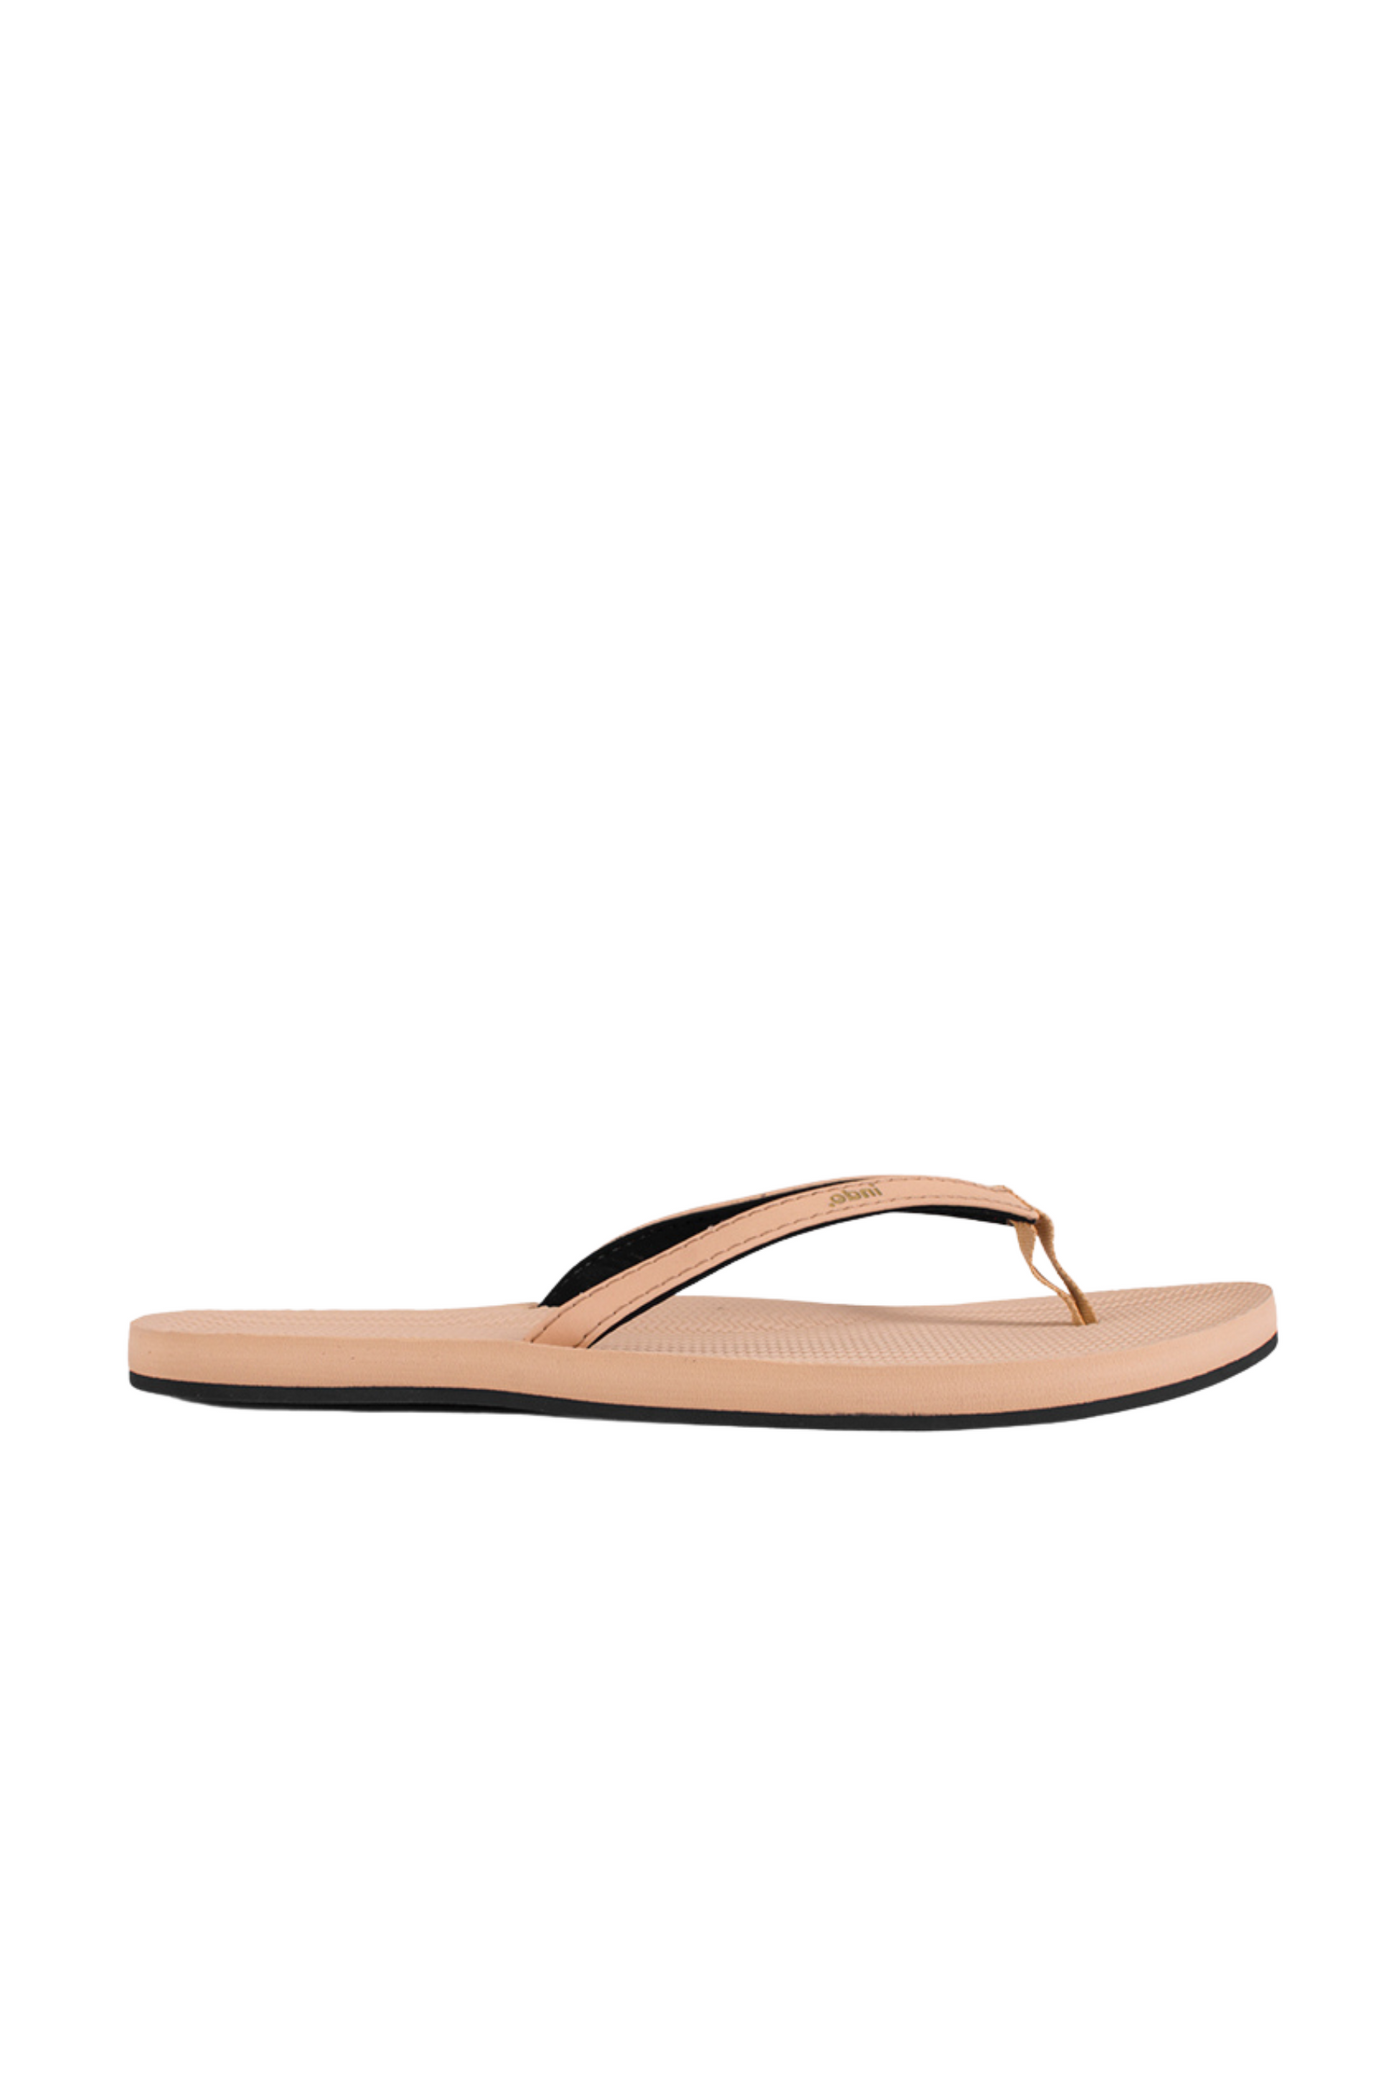 Indosole Women’s ESSNTLS Flip Flops in Light Soil, available on ZERRIN with free Singapore shipping